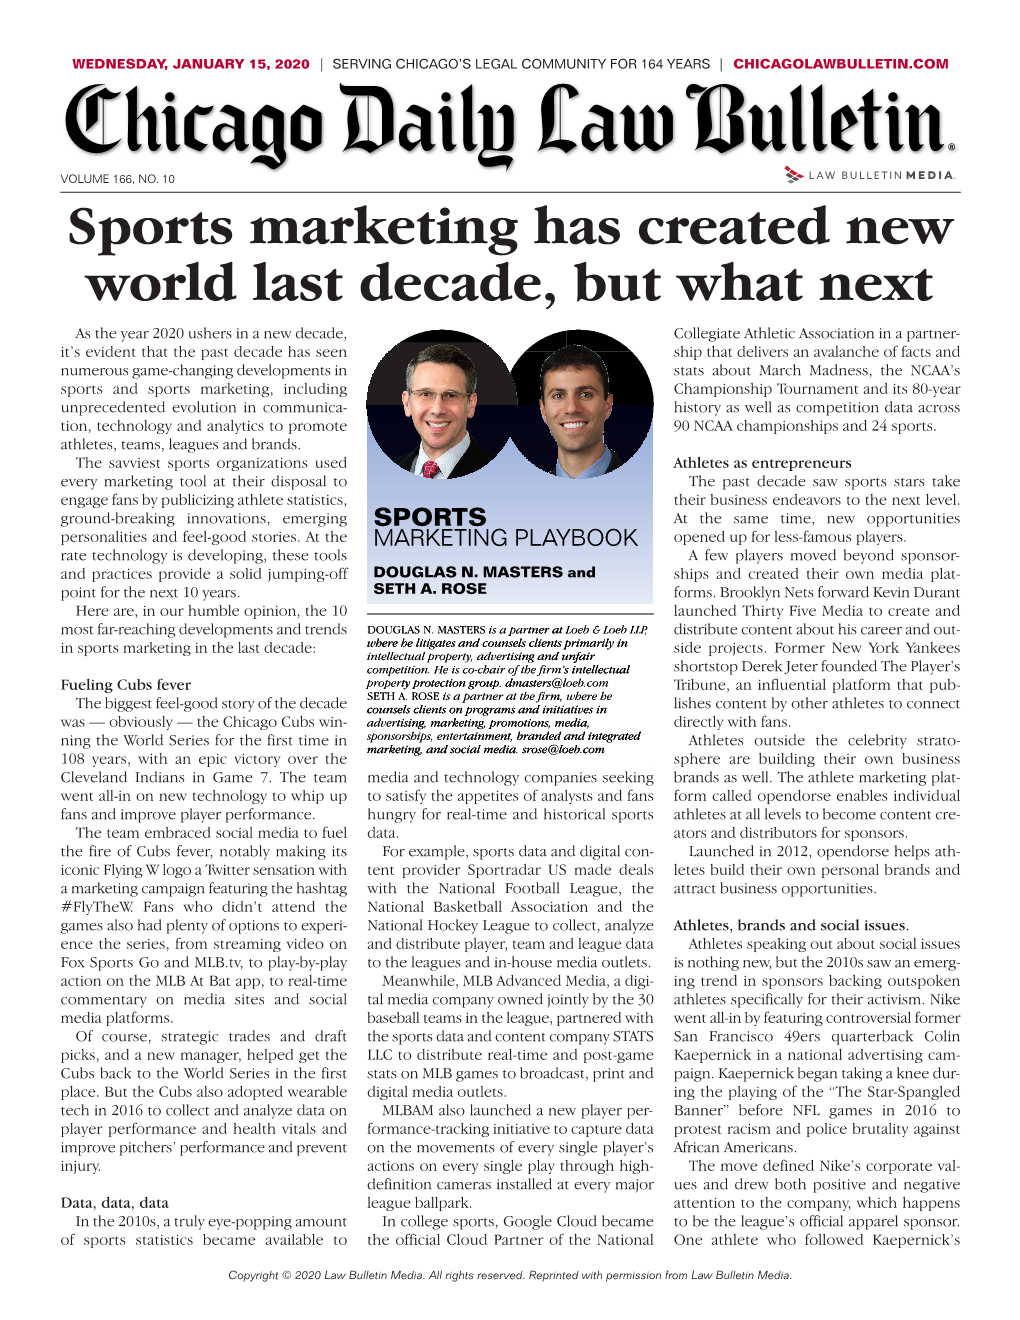 Sports Marketing Has Created New World Last Decade, but What Next